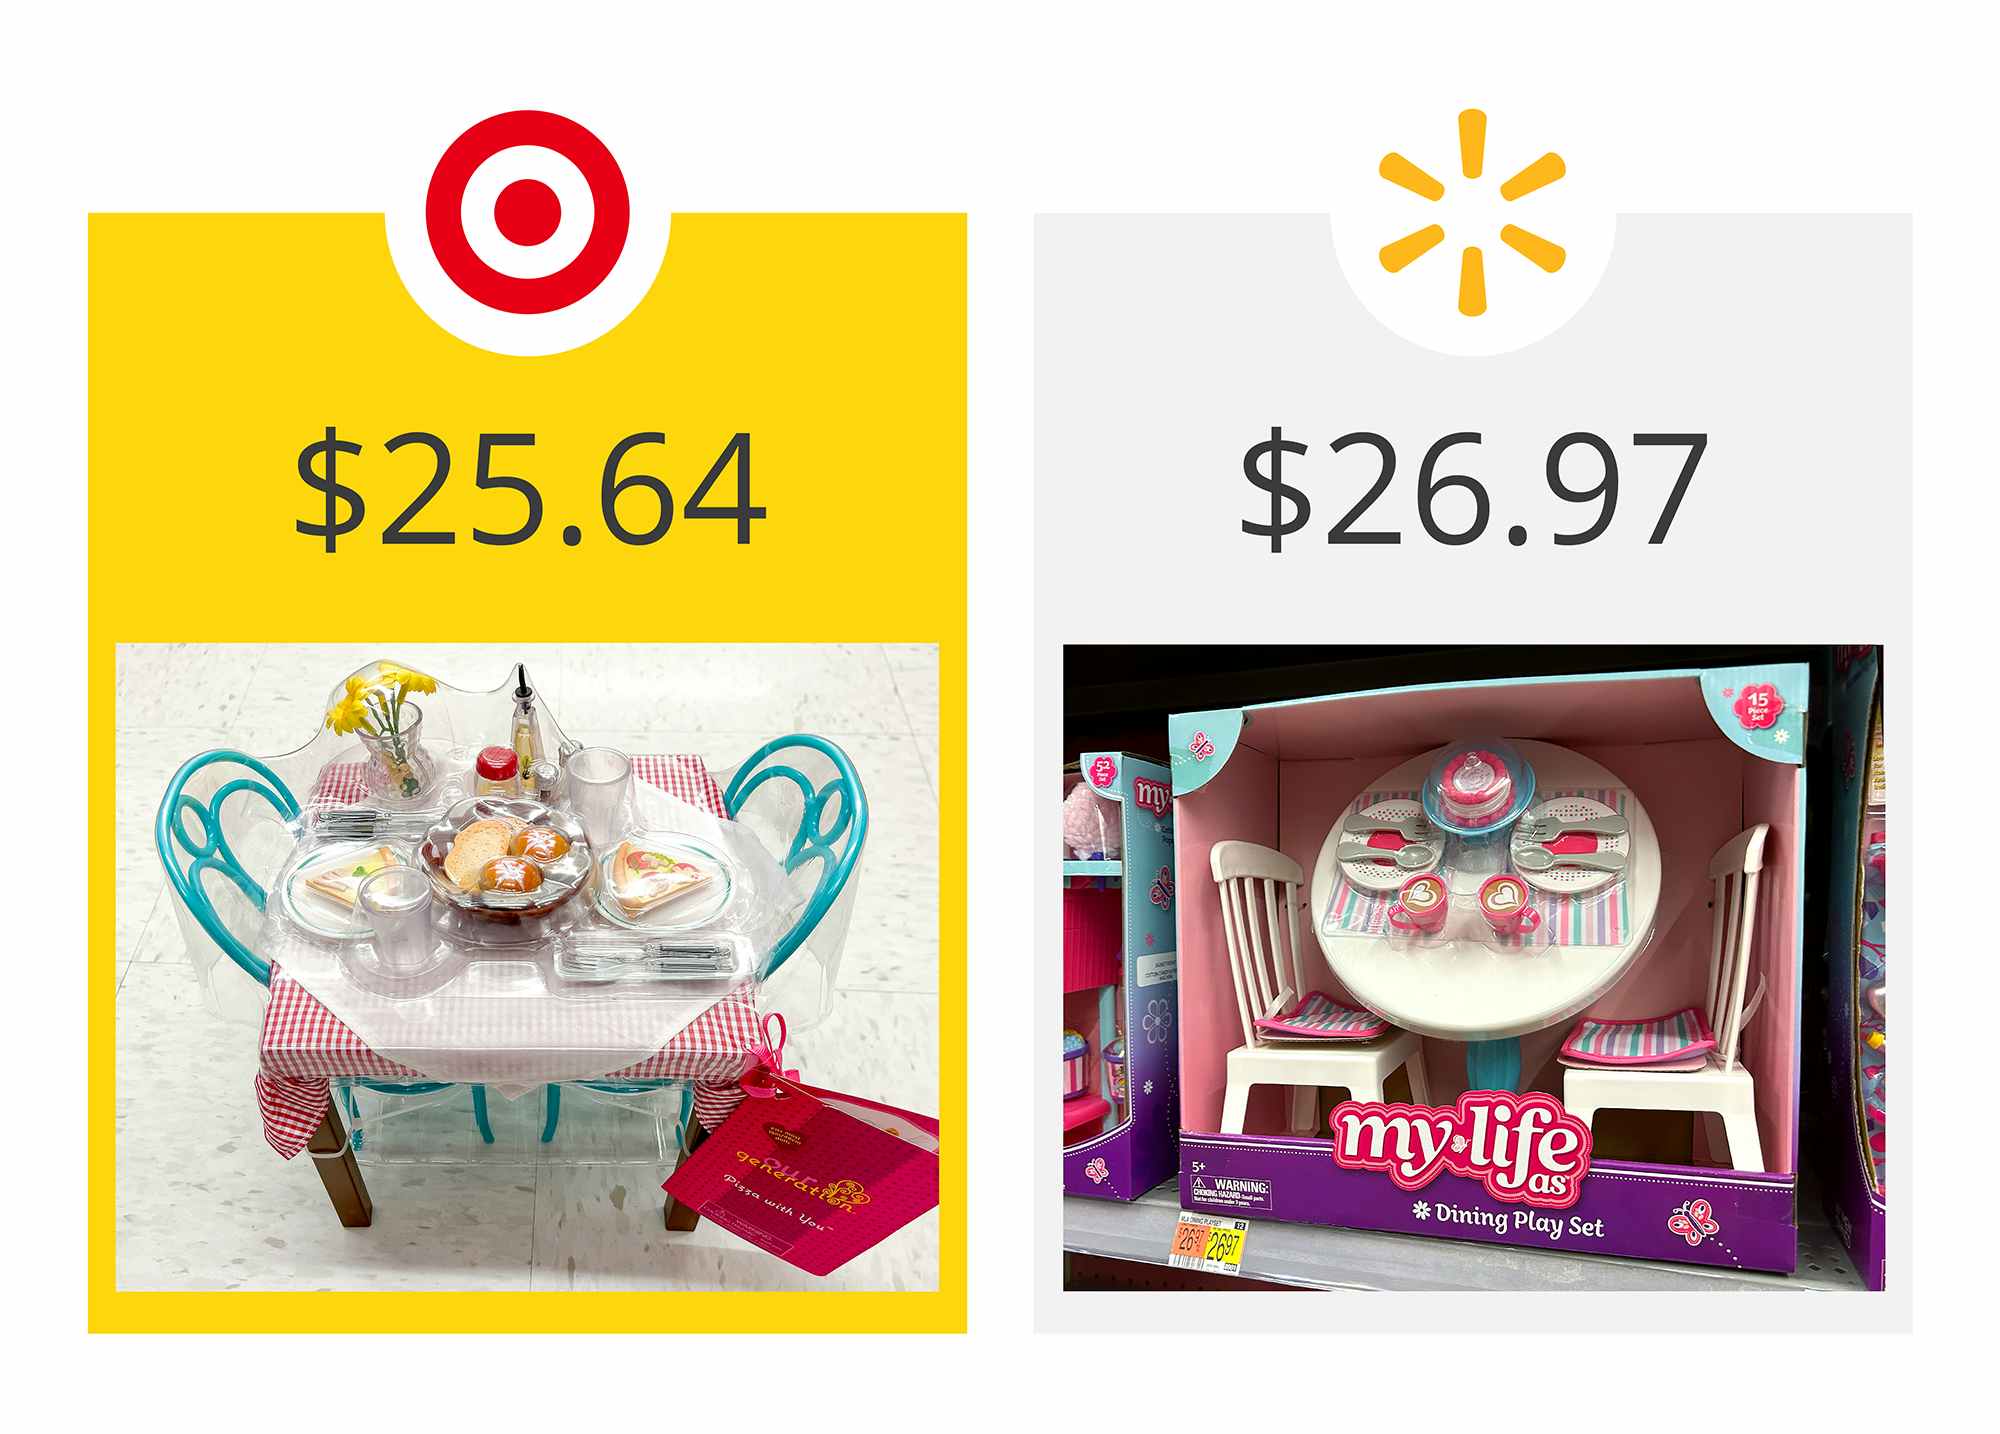 target as the winner on a graphic showing price comparison between target's our generation and walmart's my life as doll dining tables